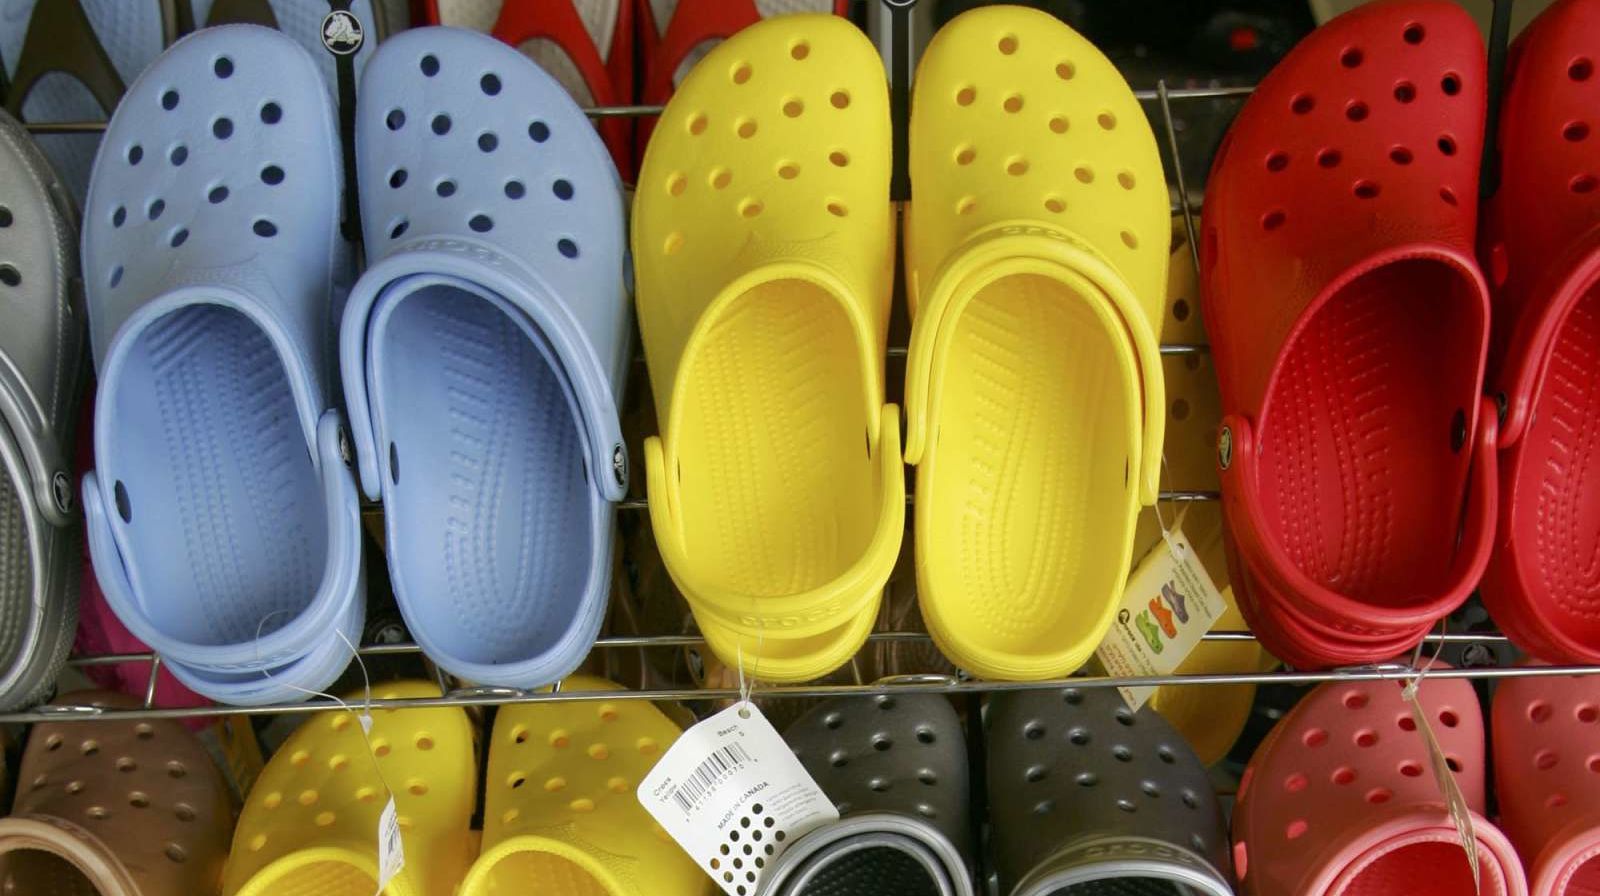 free crocs for healthcare workers get in line